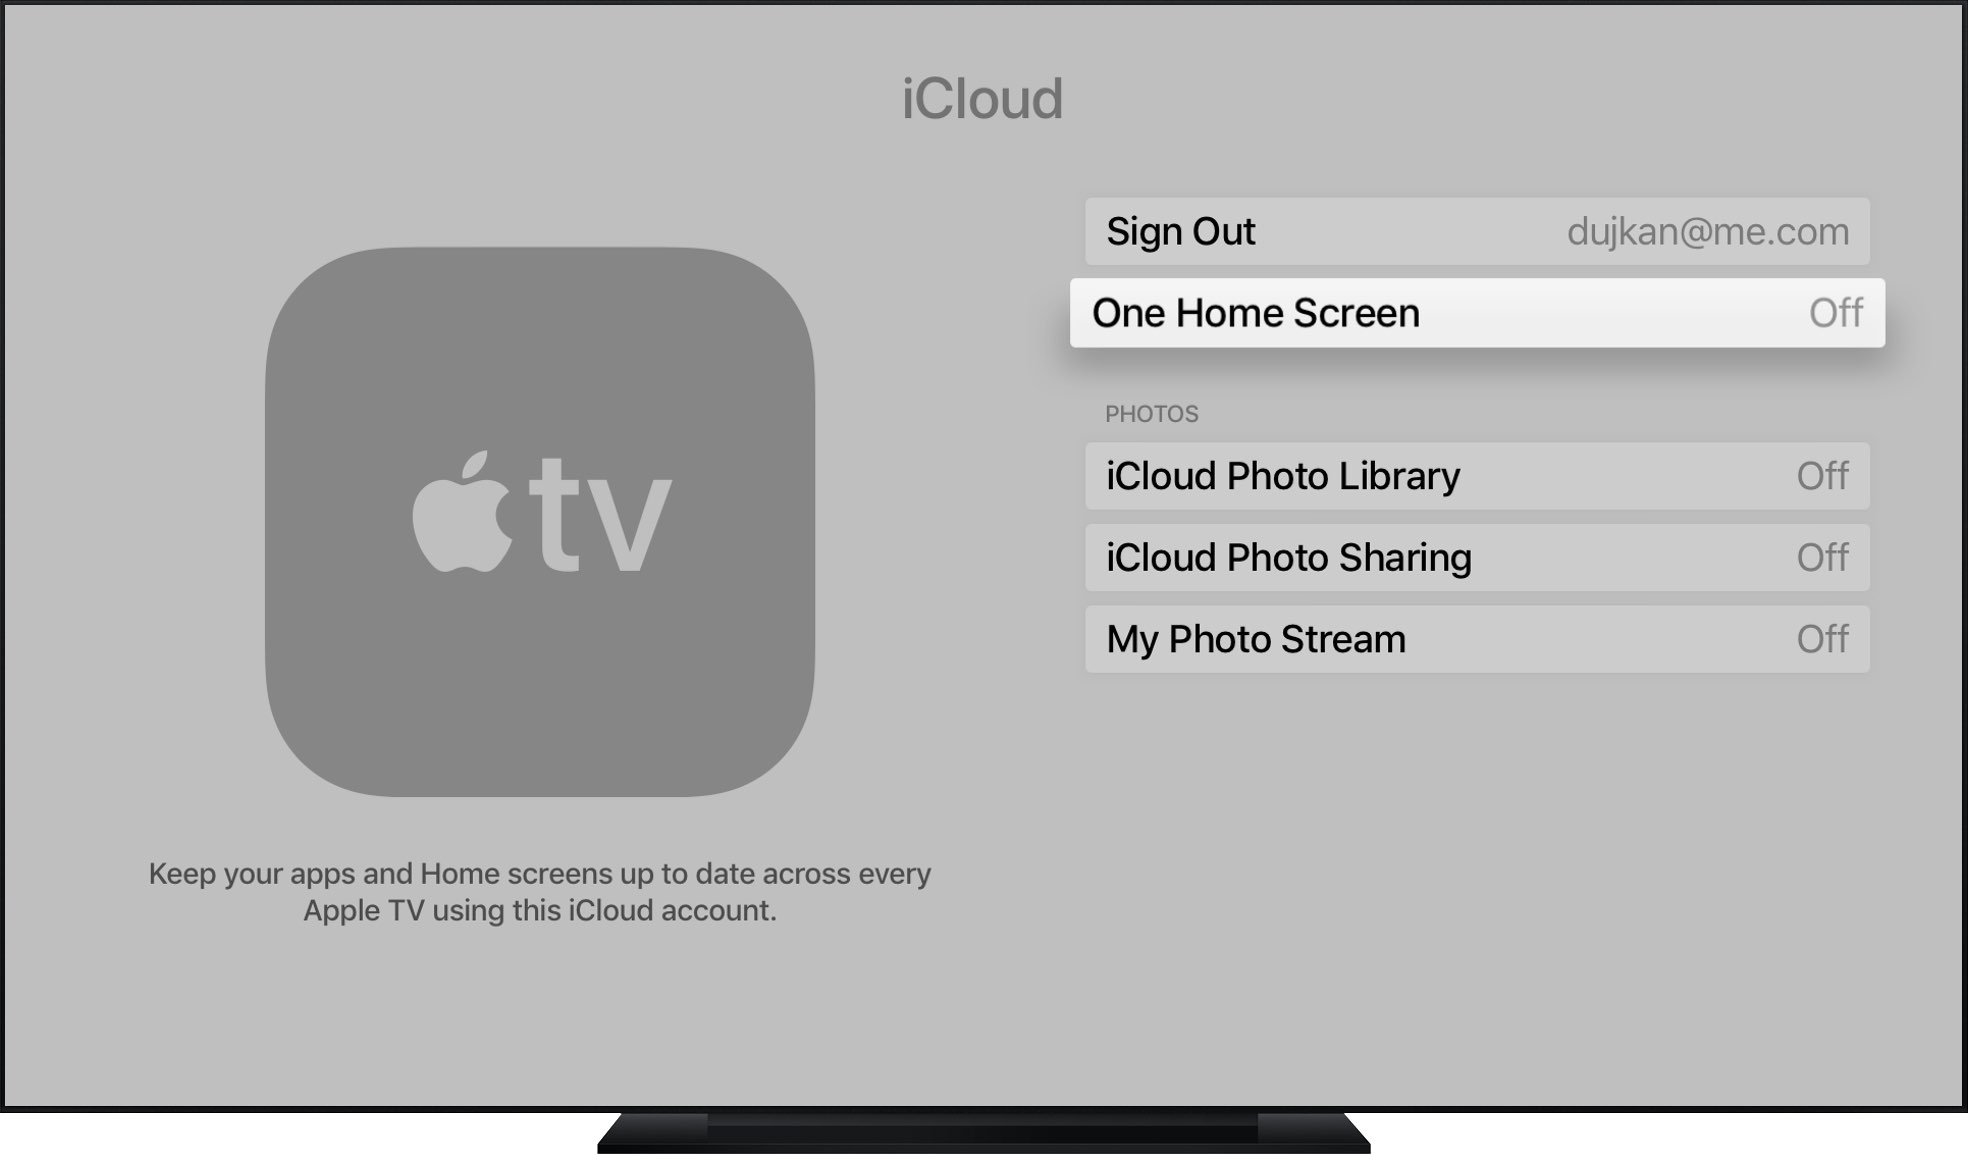 Turn on the One Home Screen Option on Apple TV